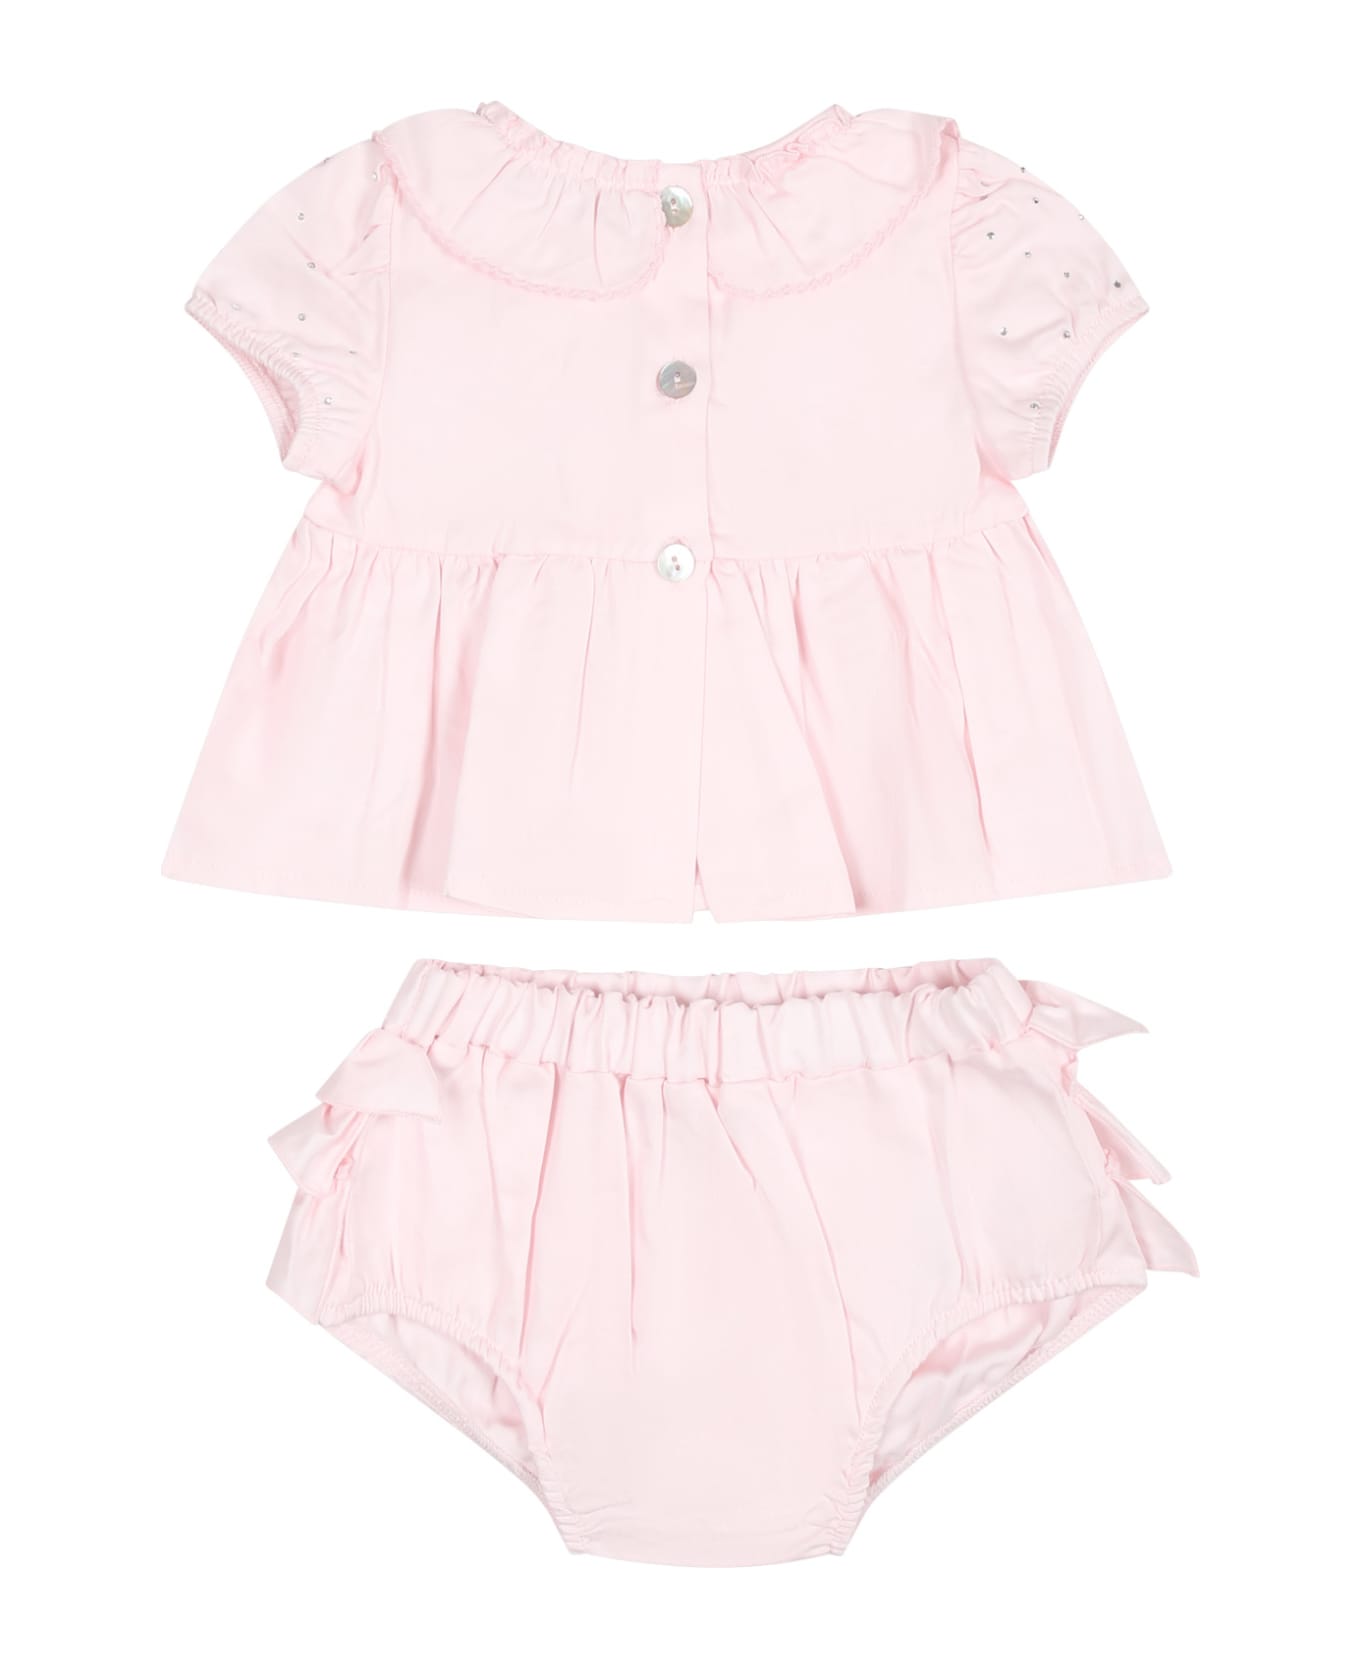 Monnalisa Pink Dress For Baby Girl With Rhinestones - Pink